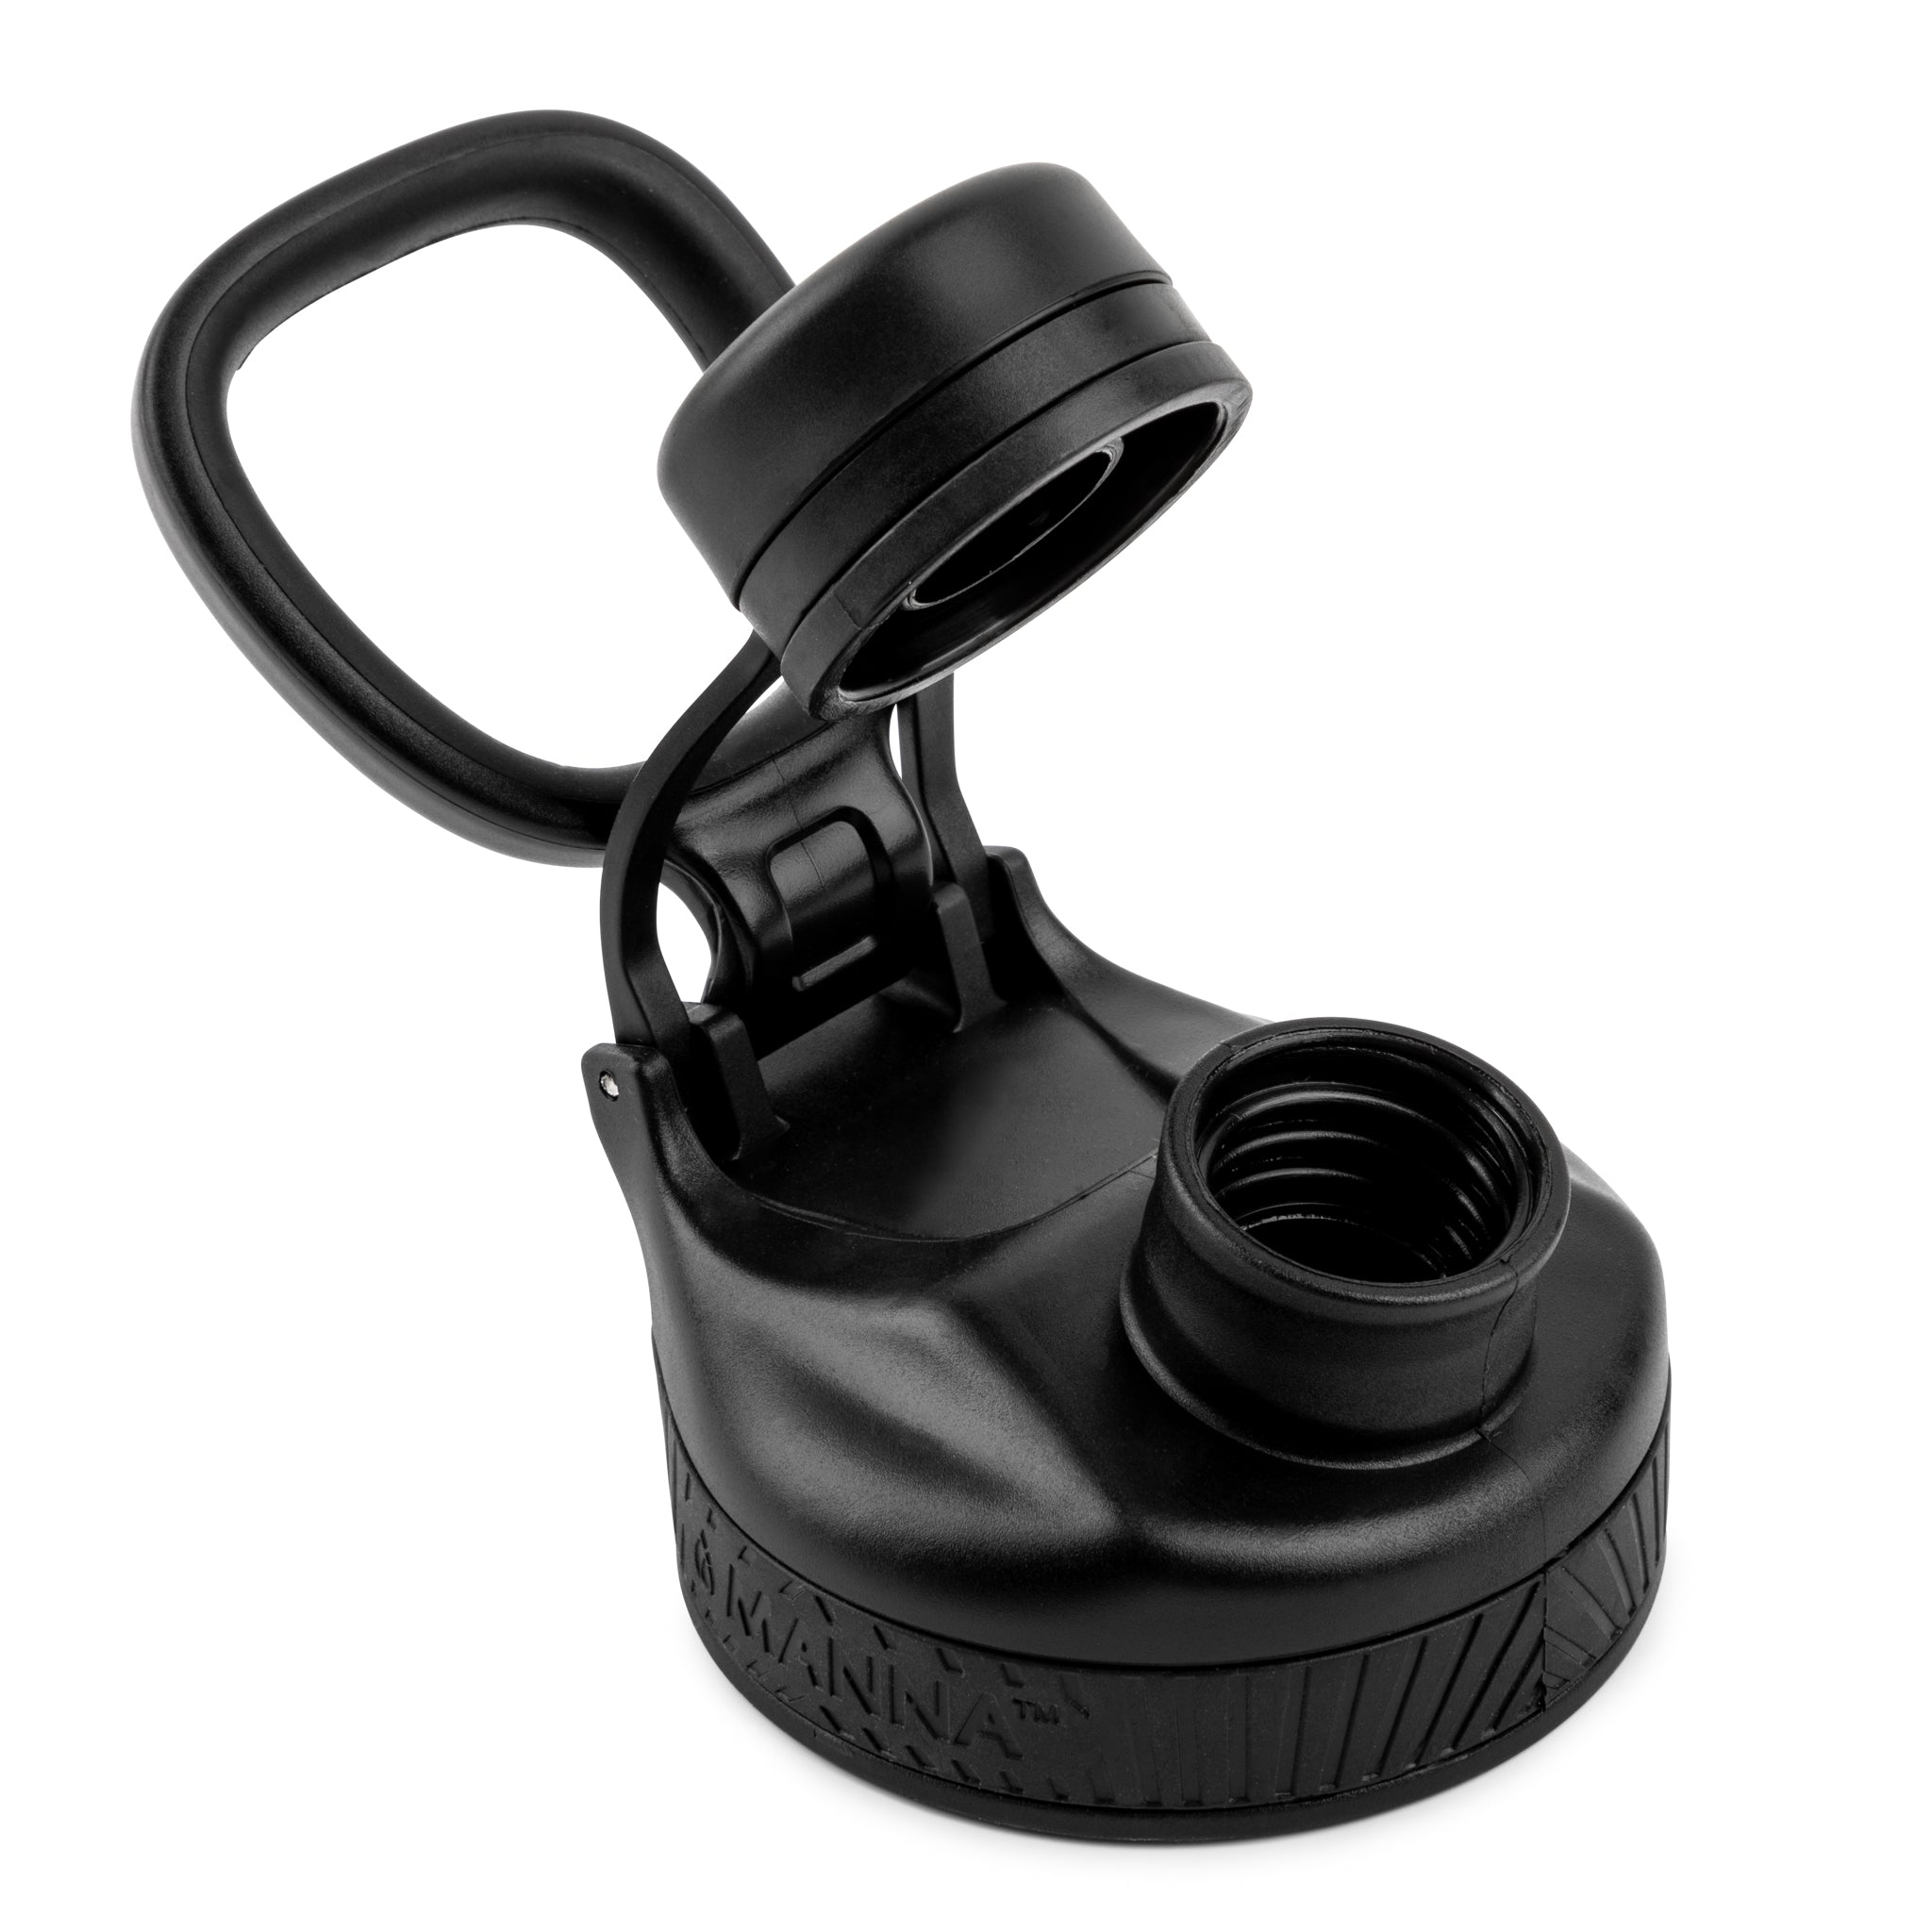 UA Pro Water Bottle Replacement Lid